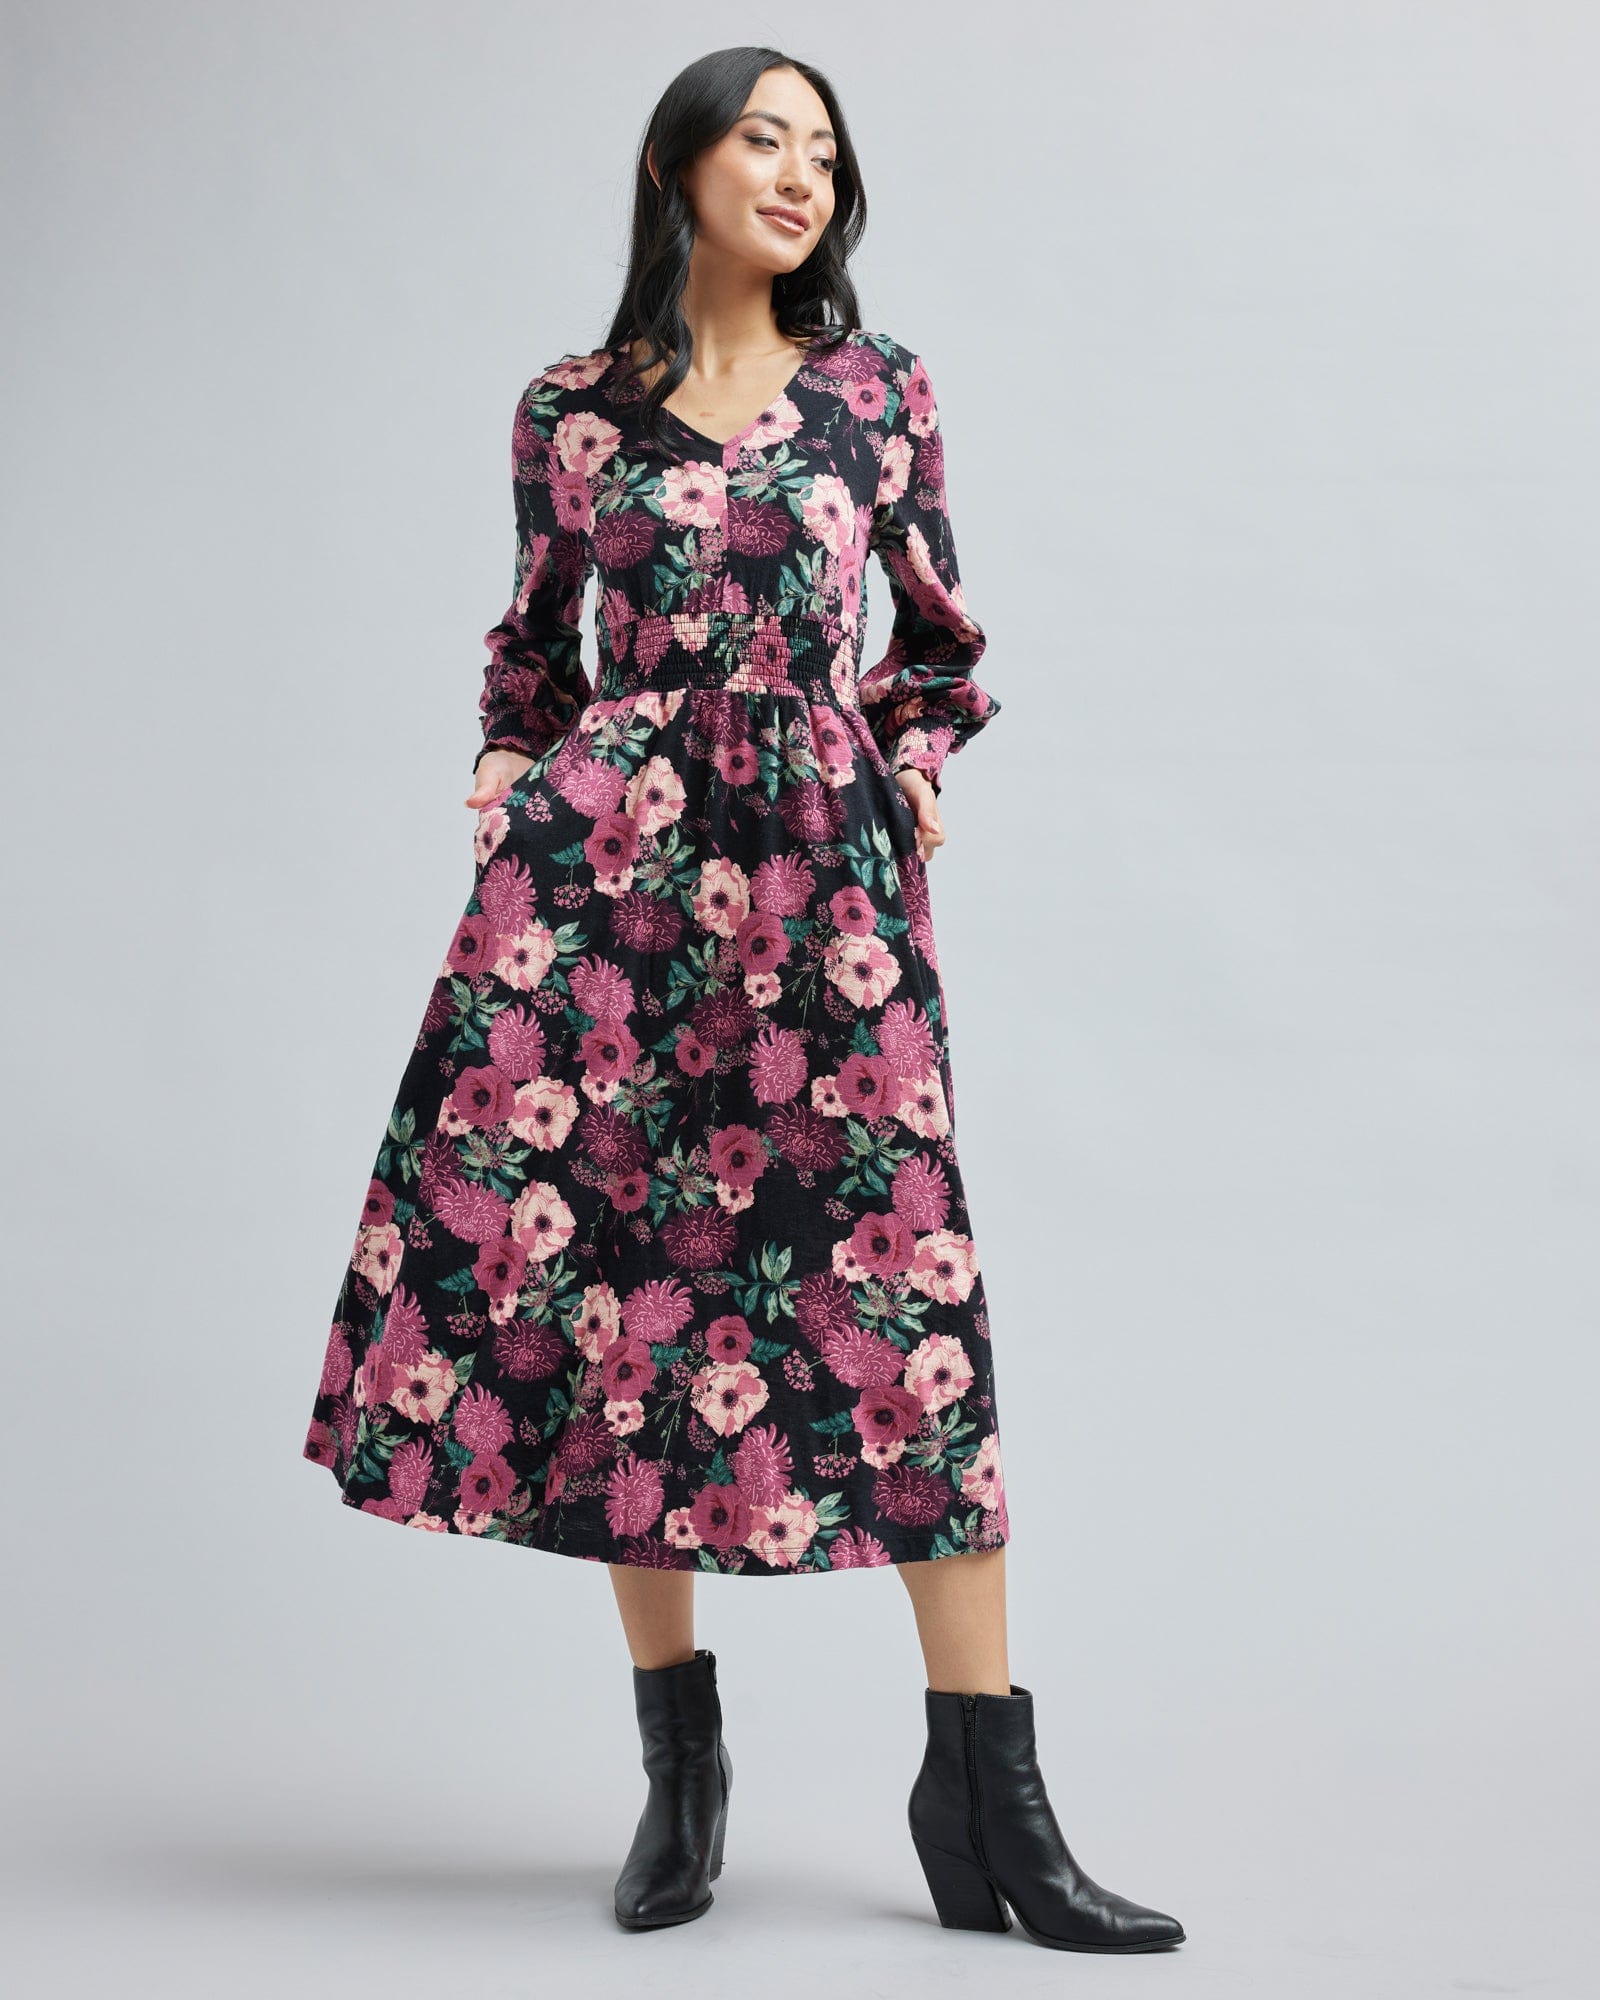 Woman in a long sleeve, floral print, midi-dress